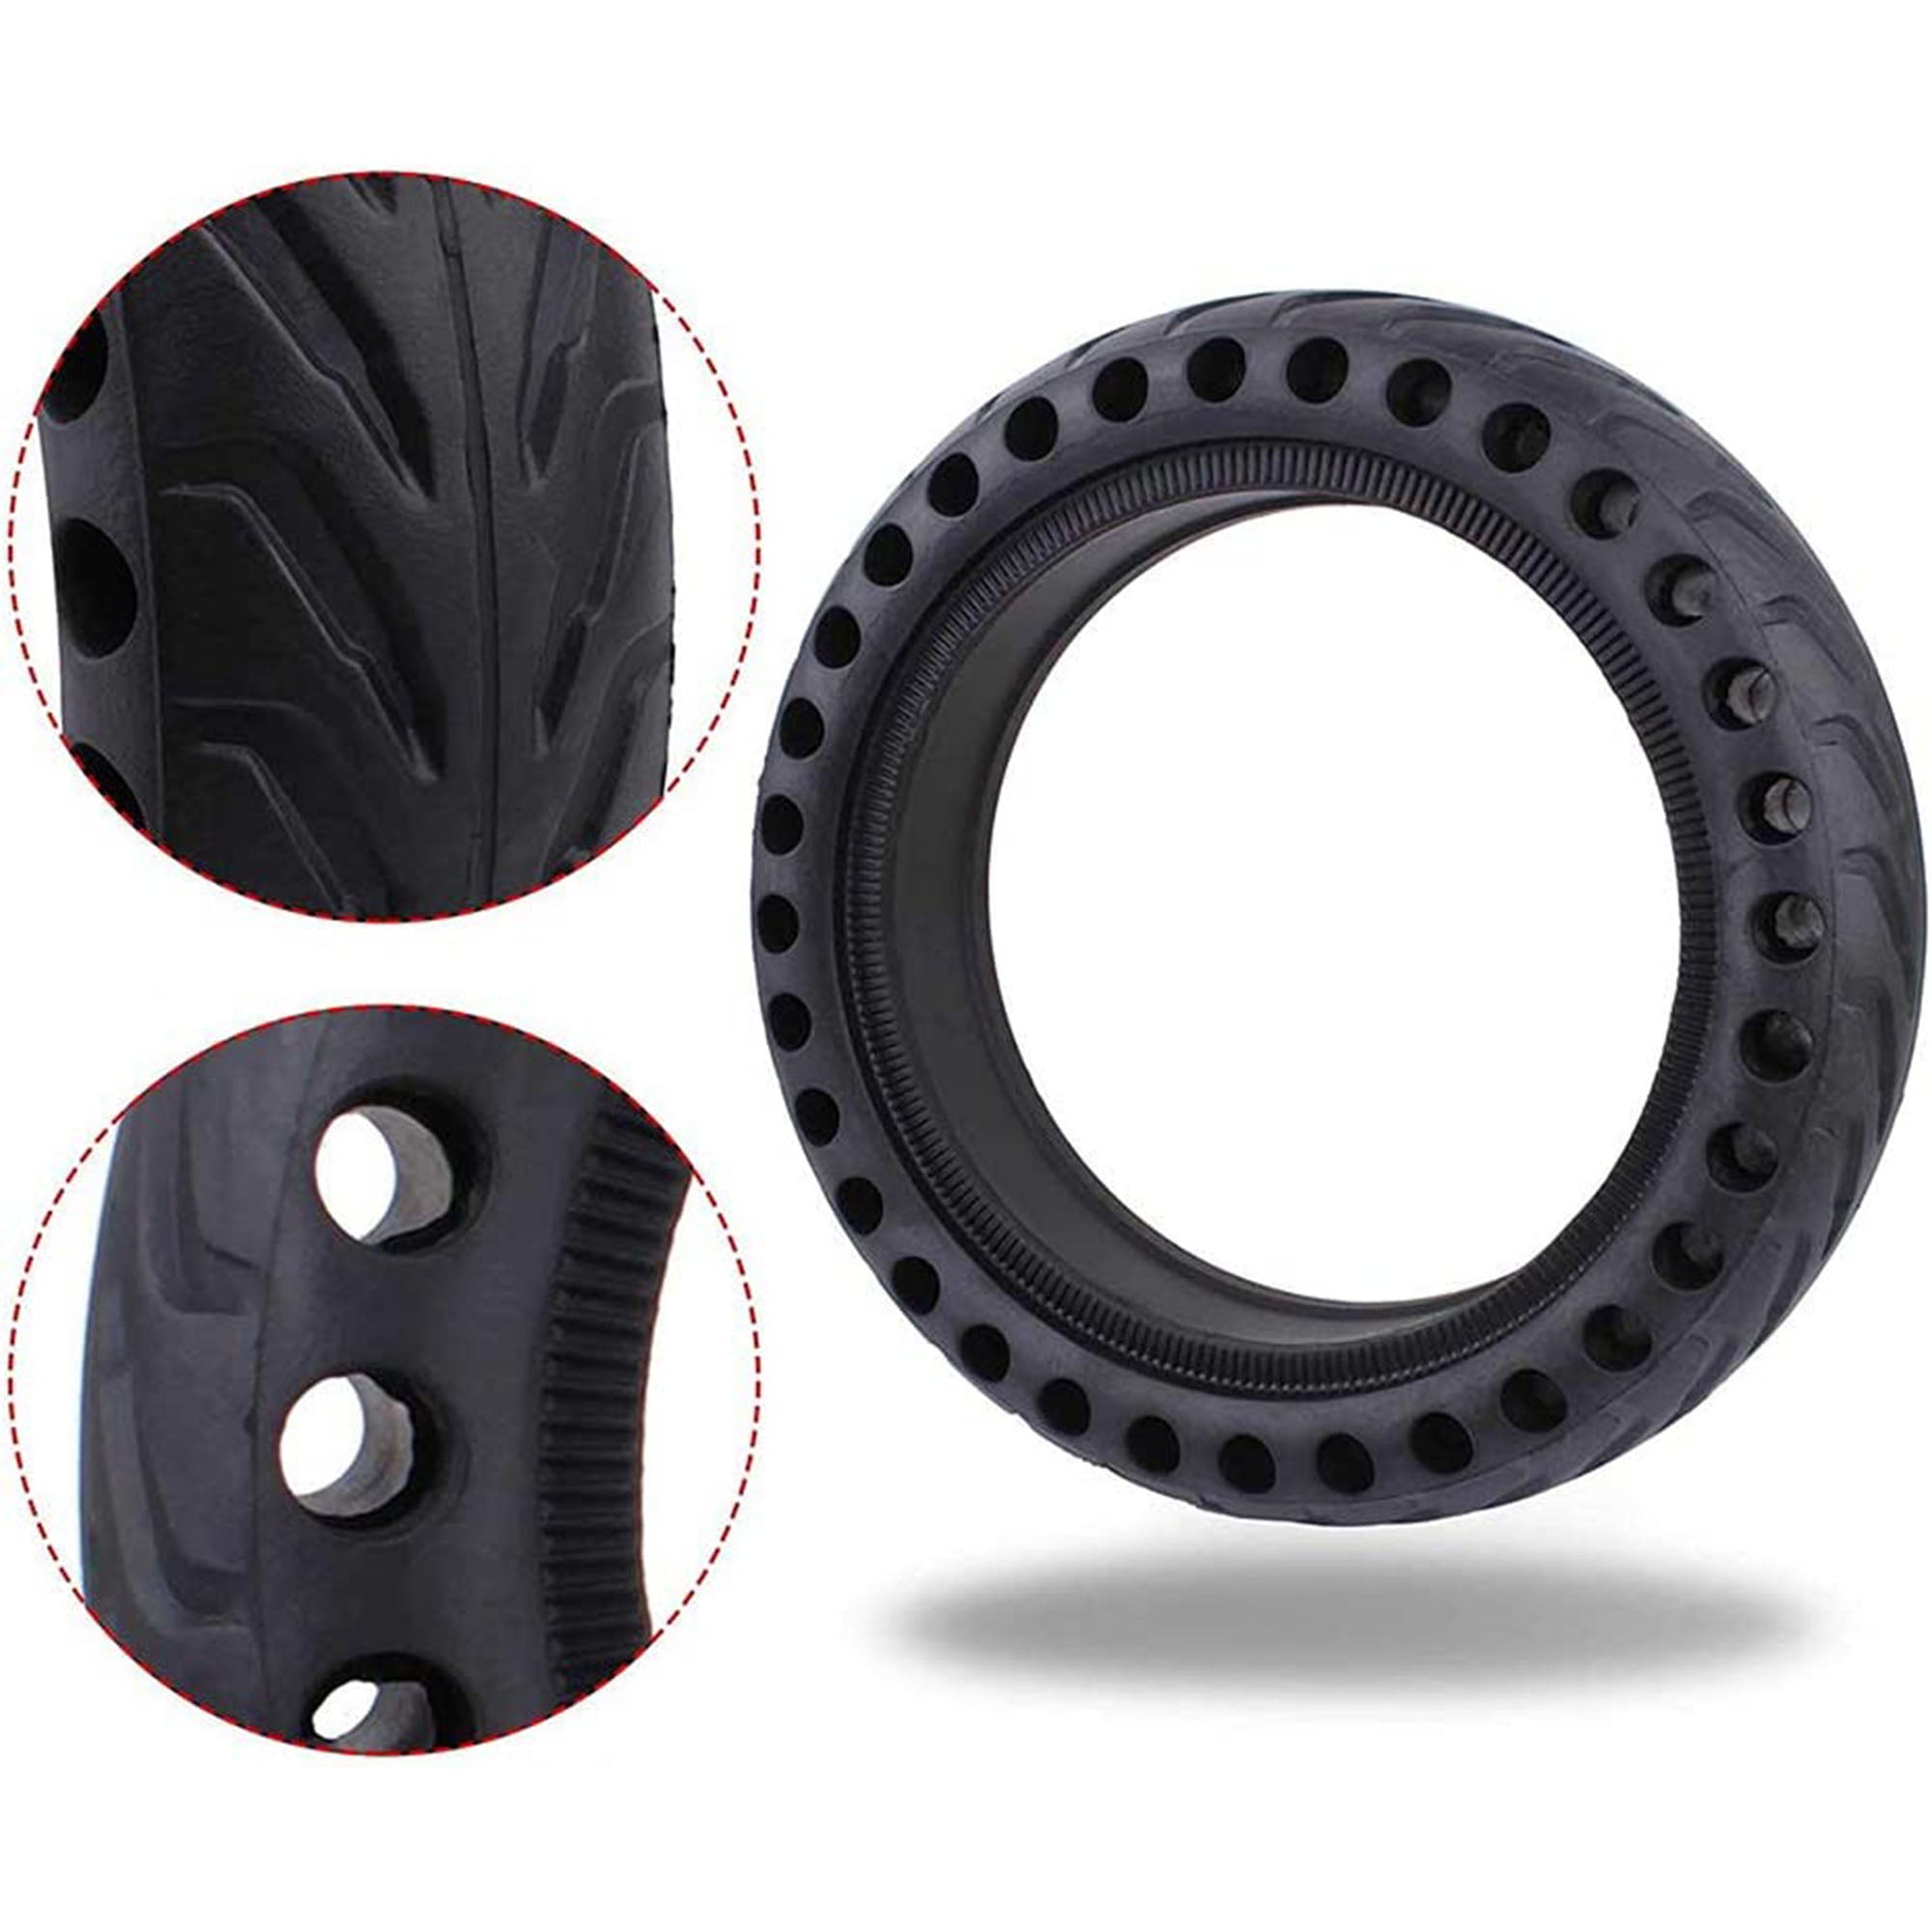 Electric Scooter Tire Honeycomb Design,8.5In Rubber Solid Tire Front Rear Tire, Replacement